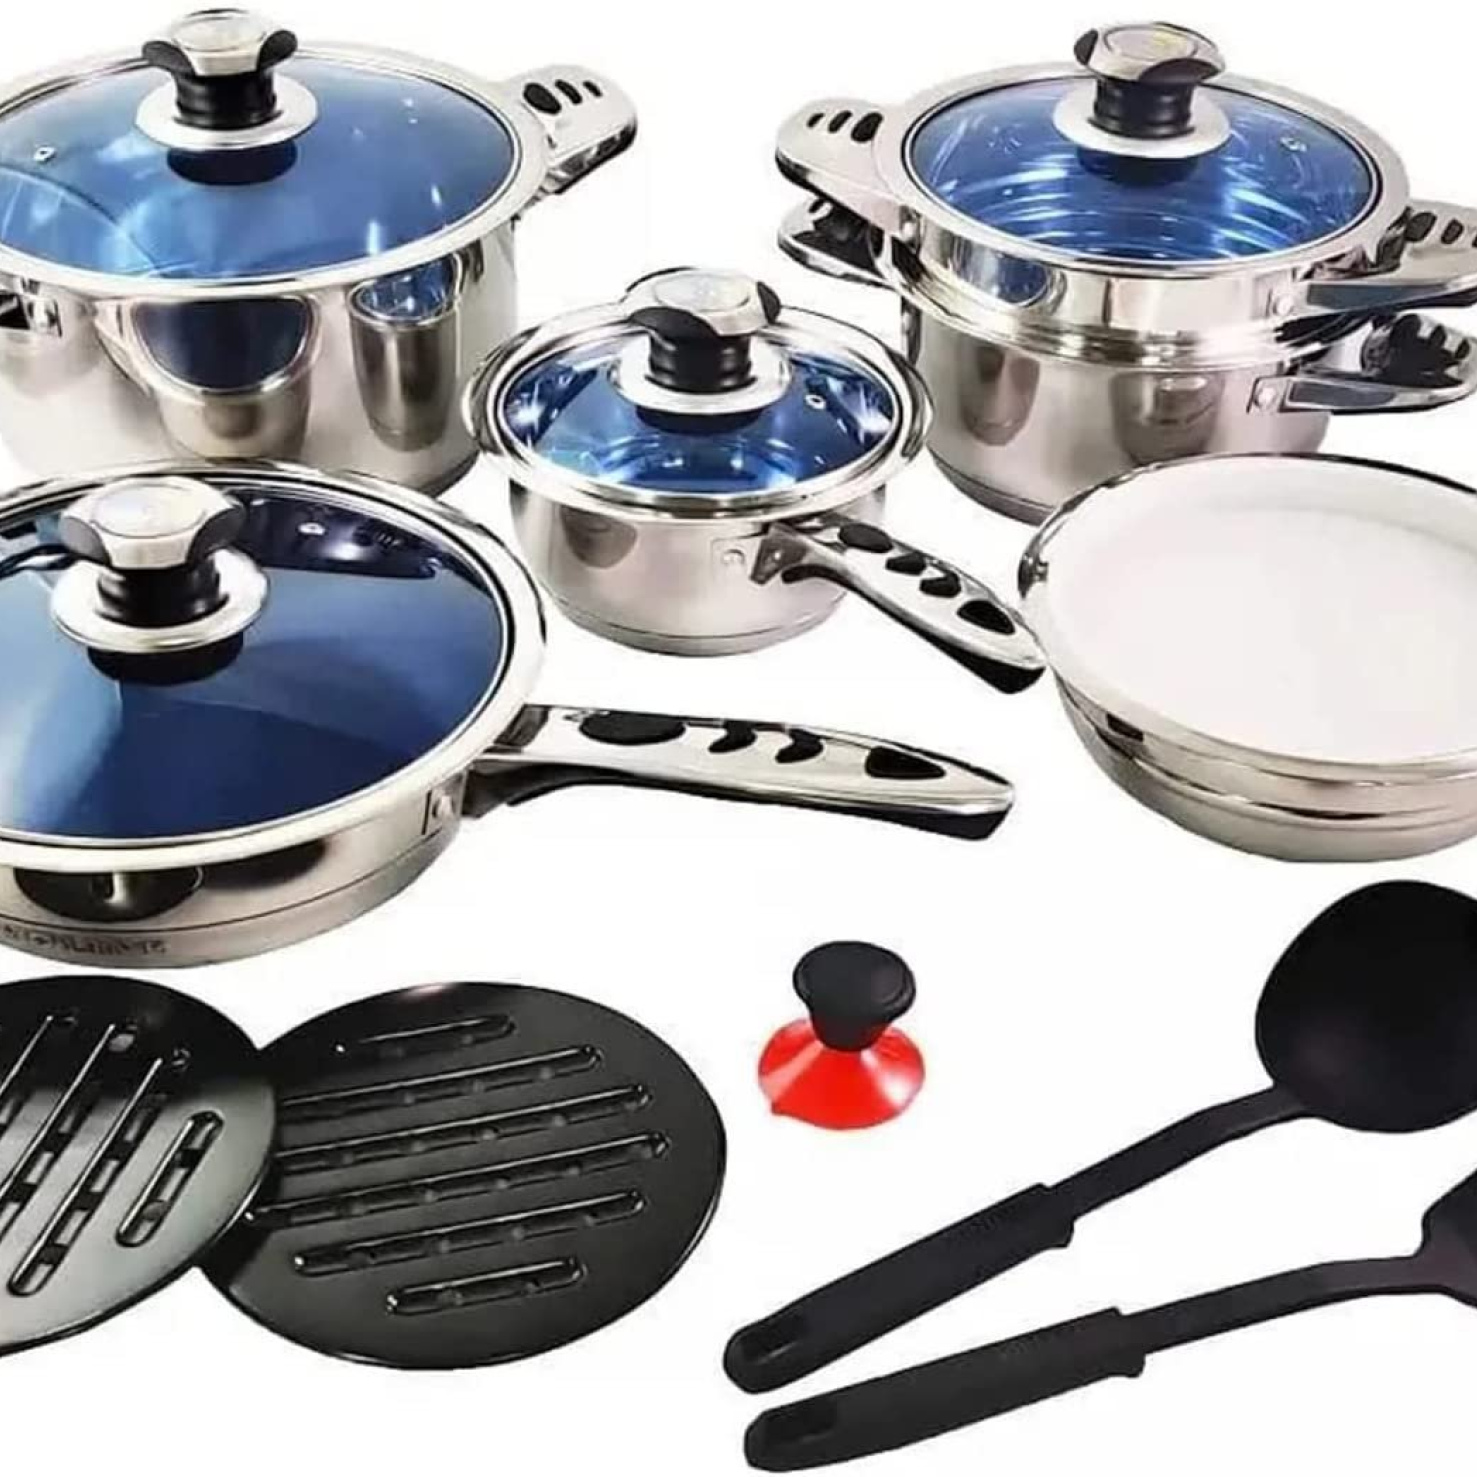 16 pcs, Pot Set, marble coated, silver cookware set, thermo knob, glass lids, Royalty Line